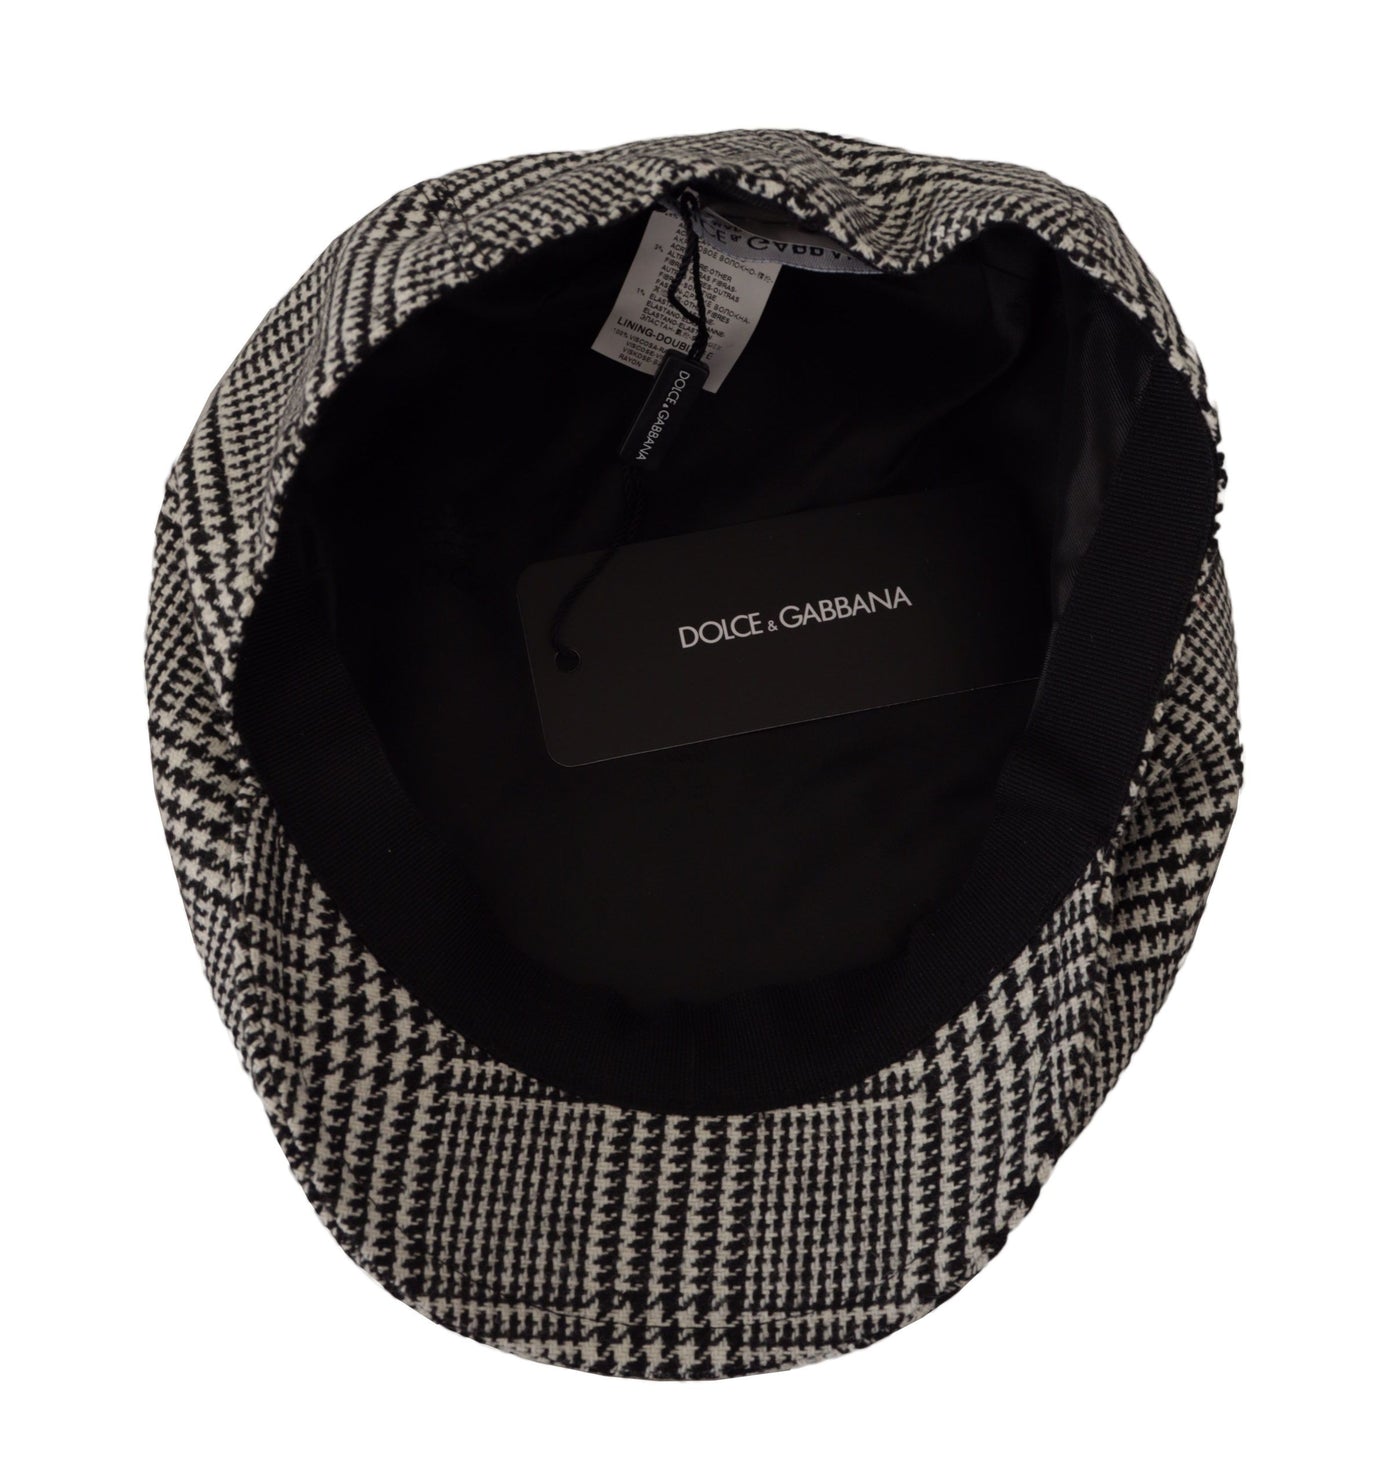 Gray Houndstooth Newsboy Capello Wool Hat